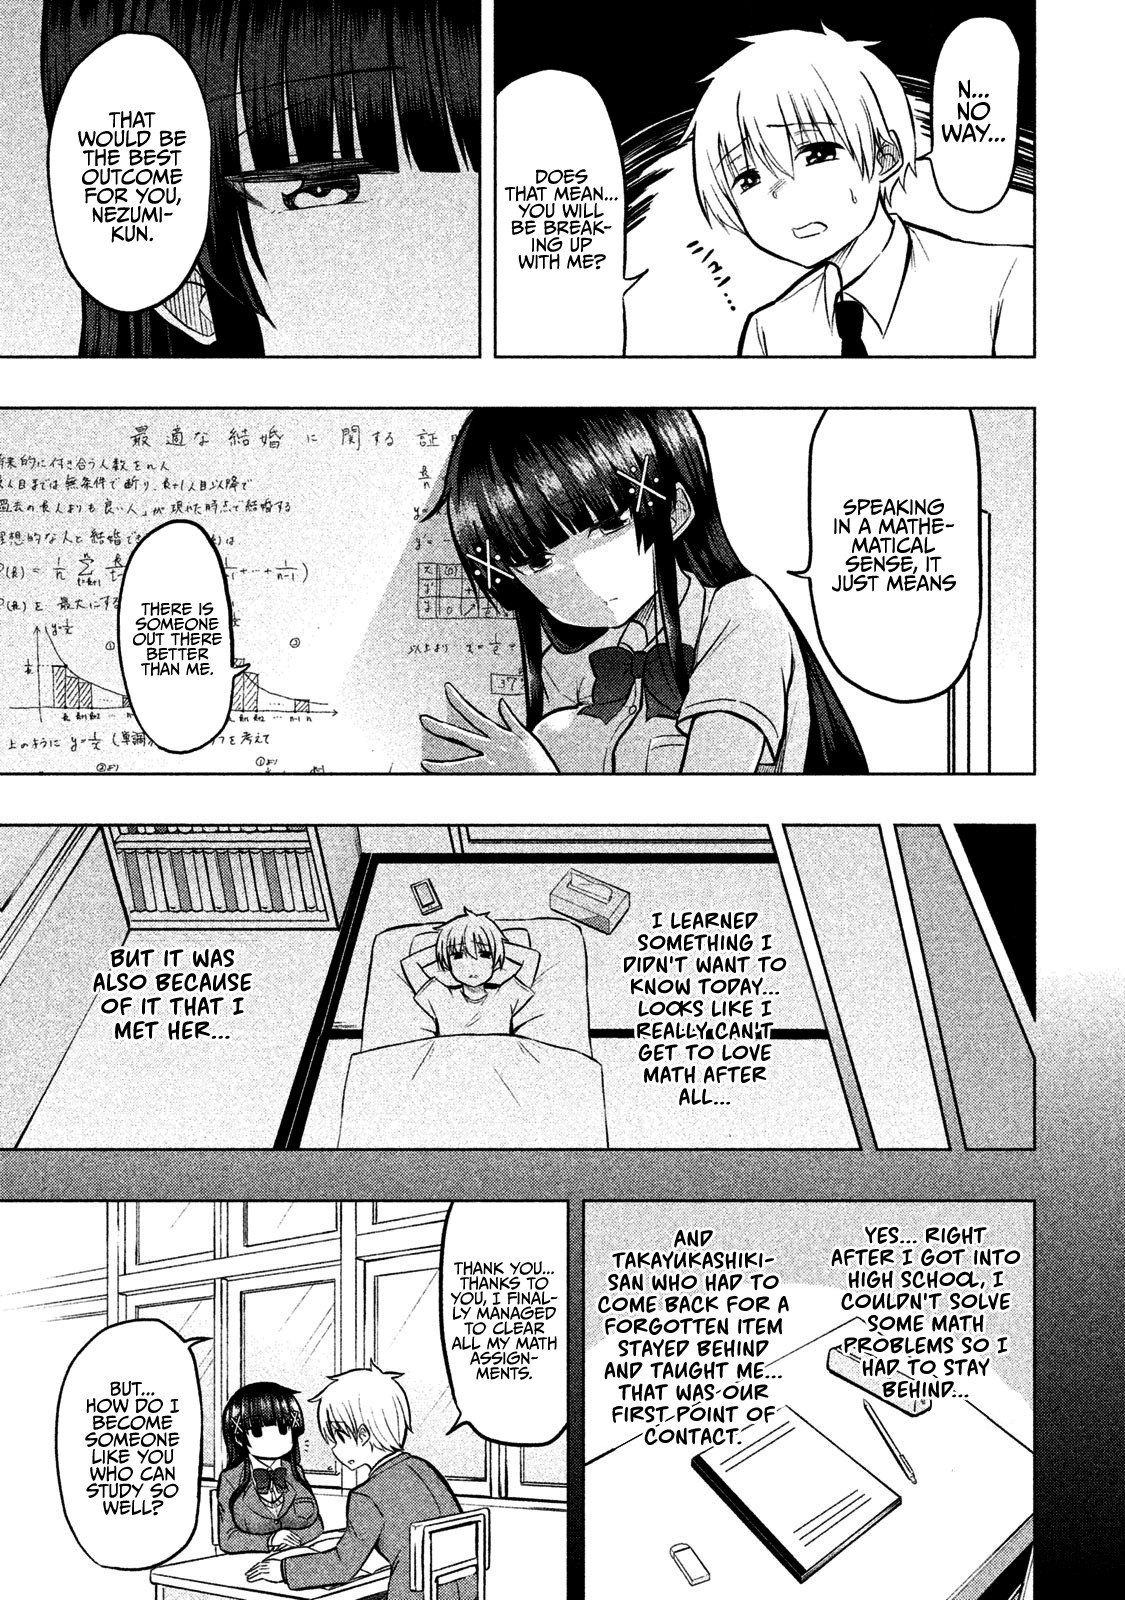 A Girl Who Is Very Well-Informed About Weird Knowledge, Takayukashiki Souko-San Chapter 22 #4